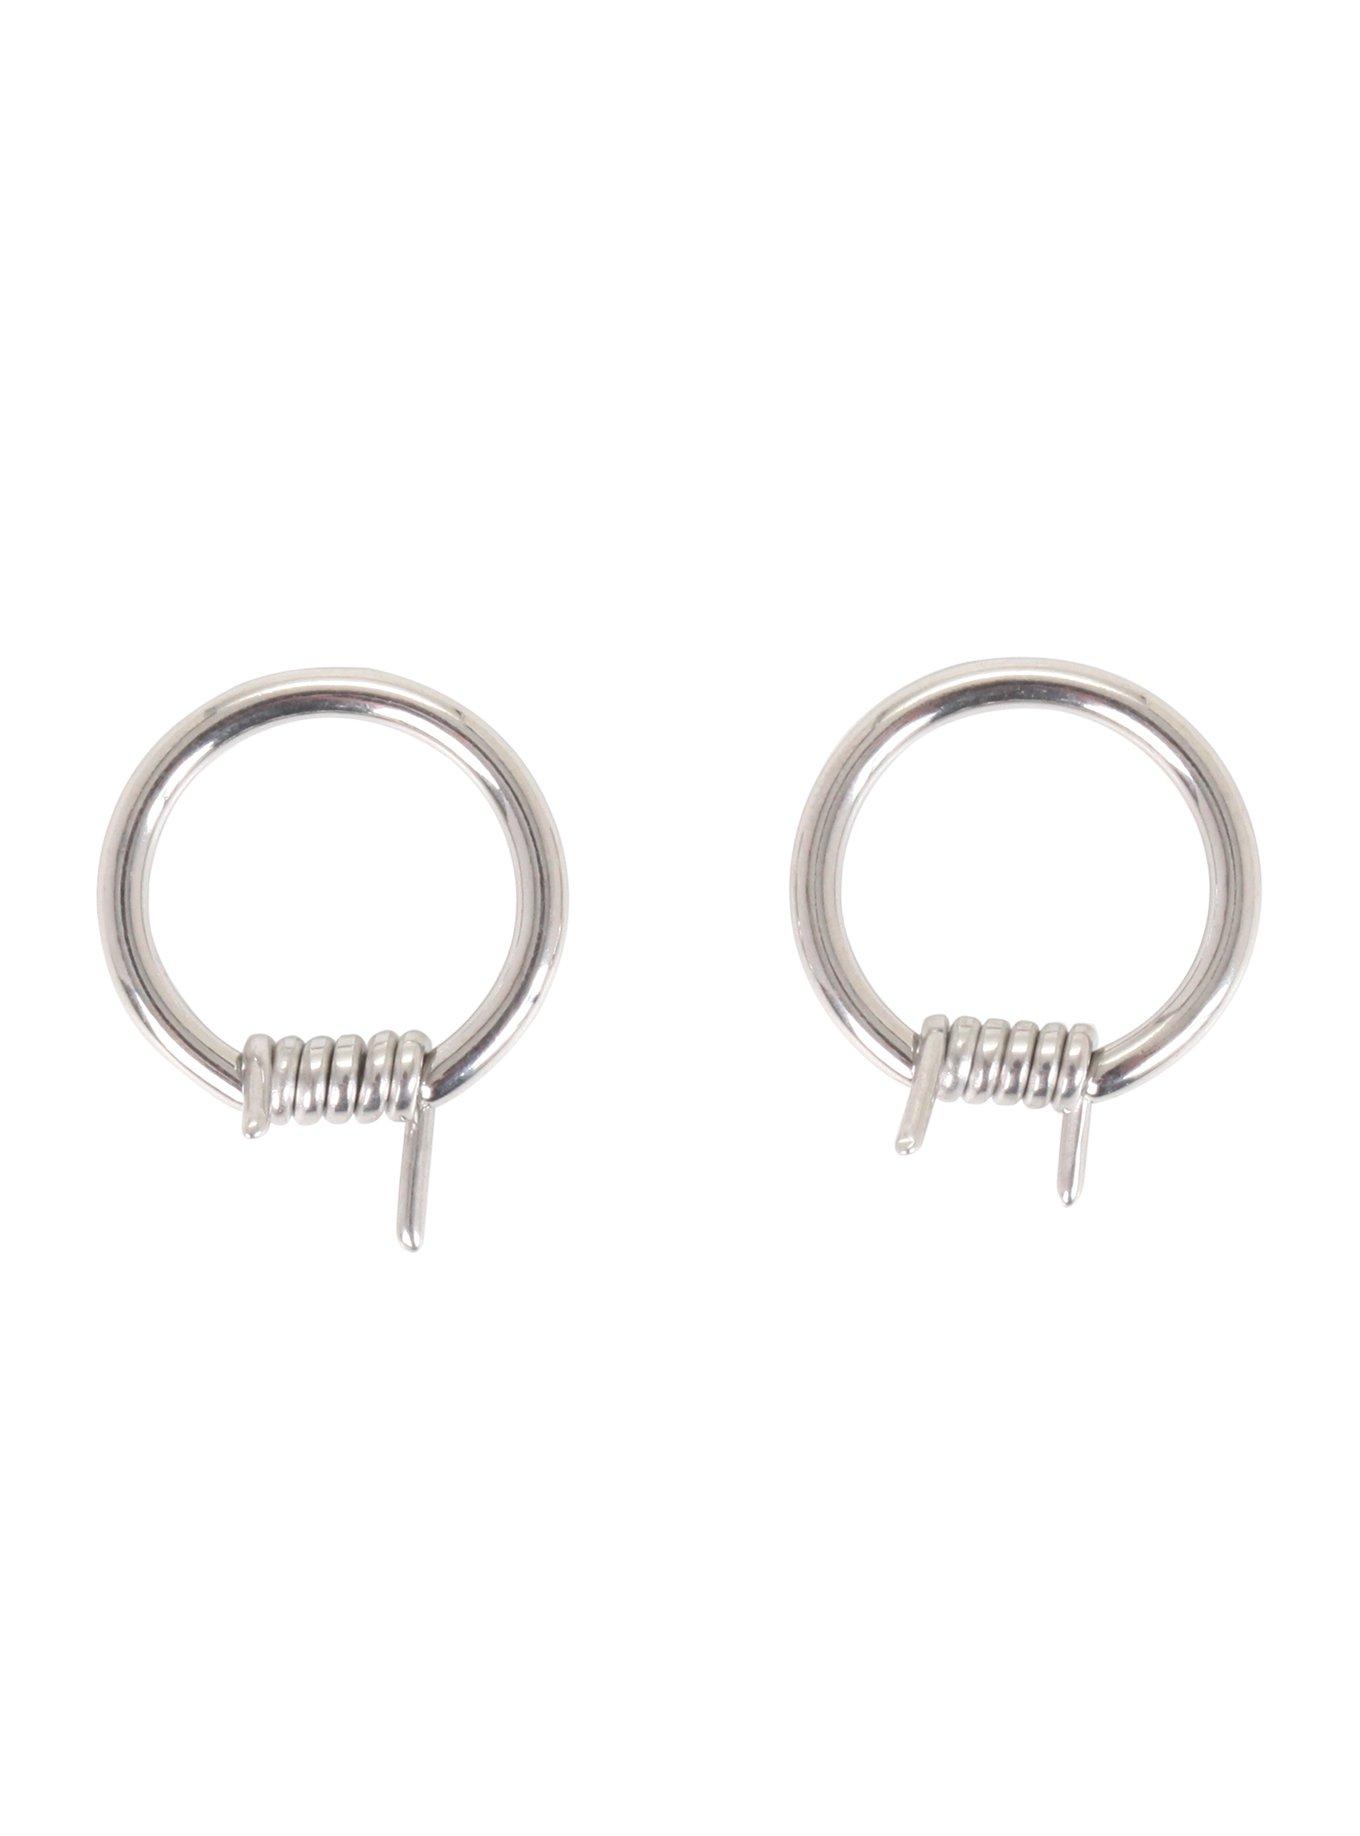 Steel Wire Captive Hoop 2 Pack | Hot Topic